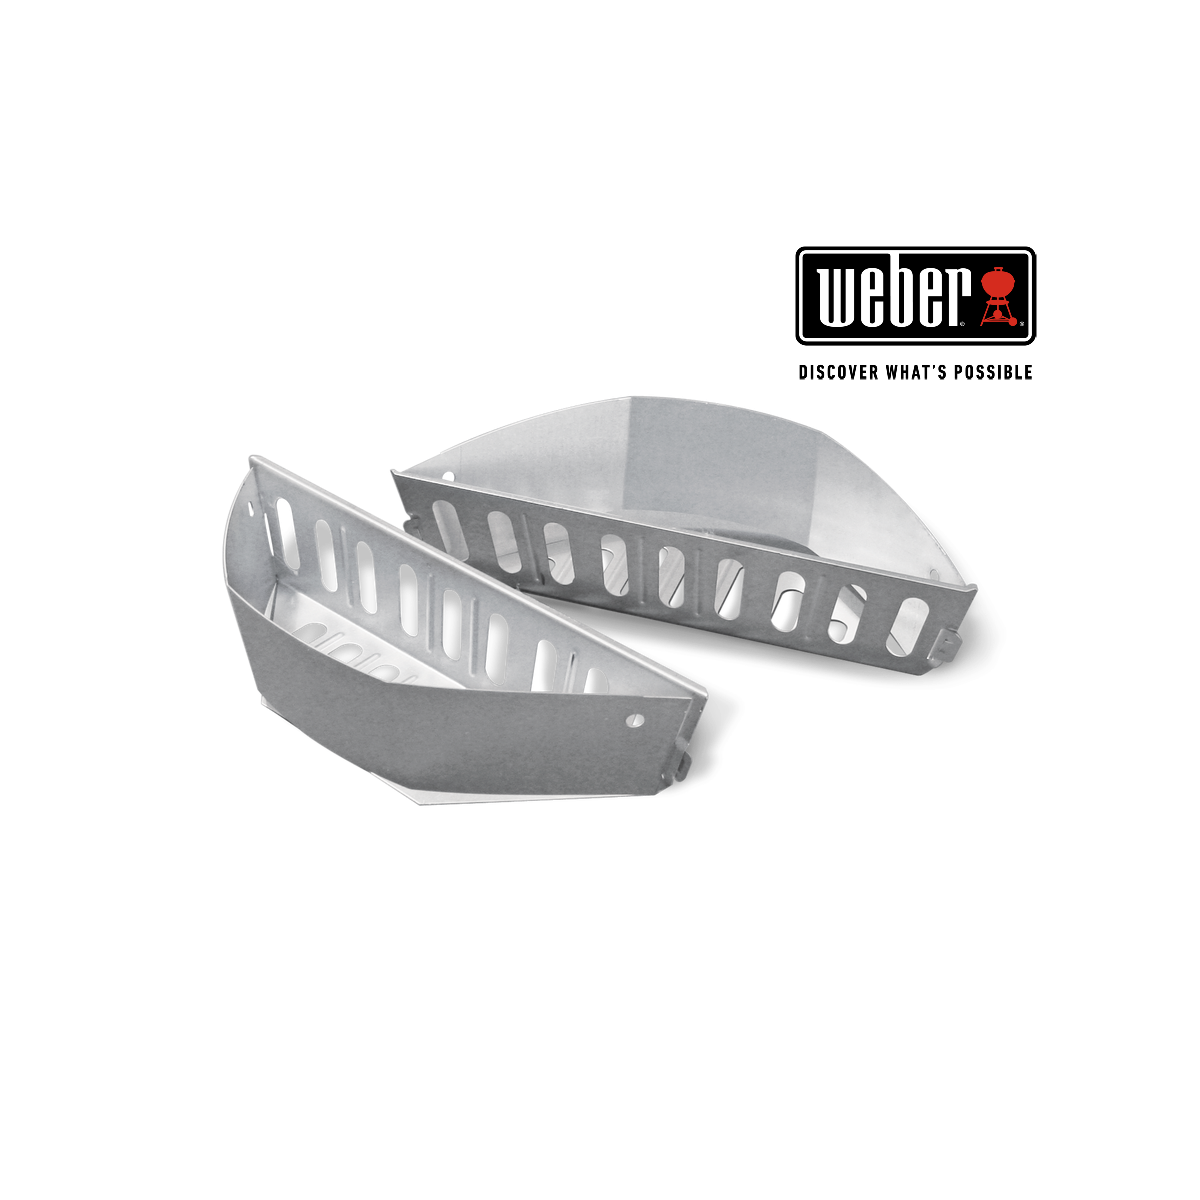 WEBER CHAR-BASKETS - FITS 57CM CHARCOAL BARBECUES AND UP, 2 PCS, 7403